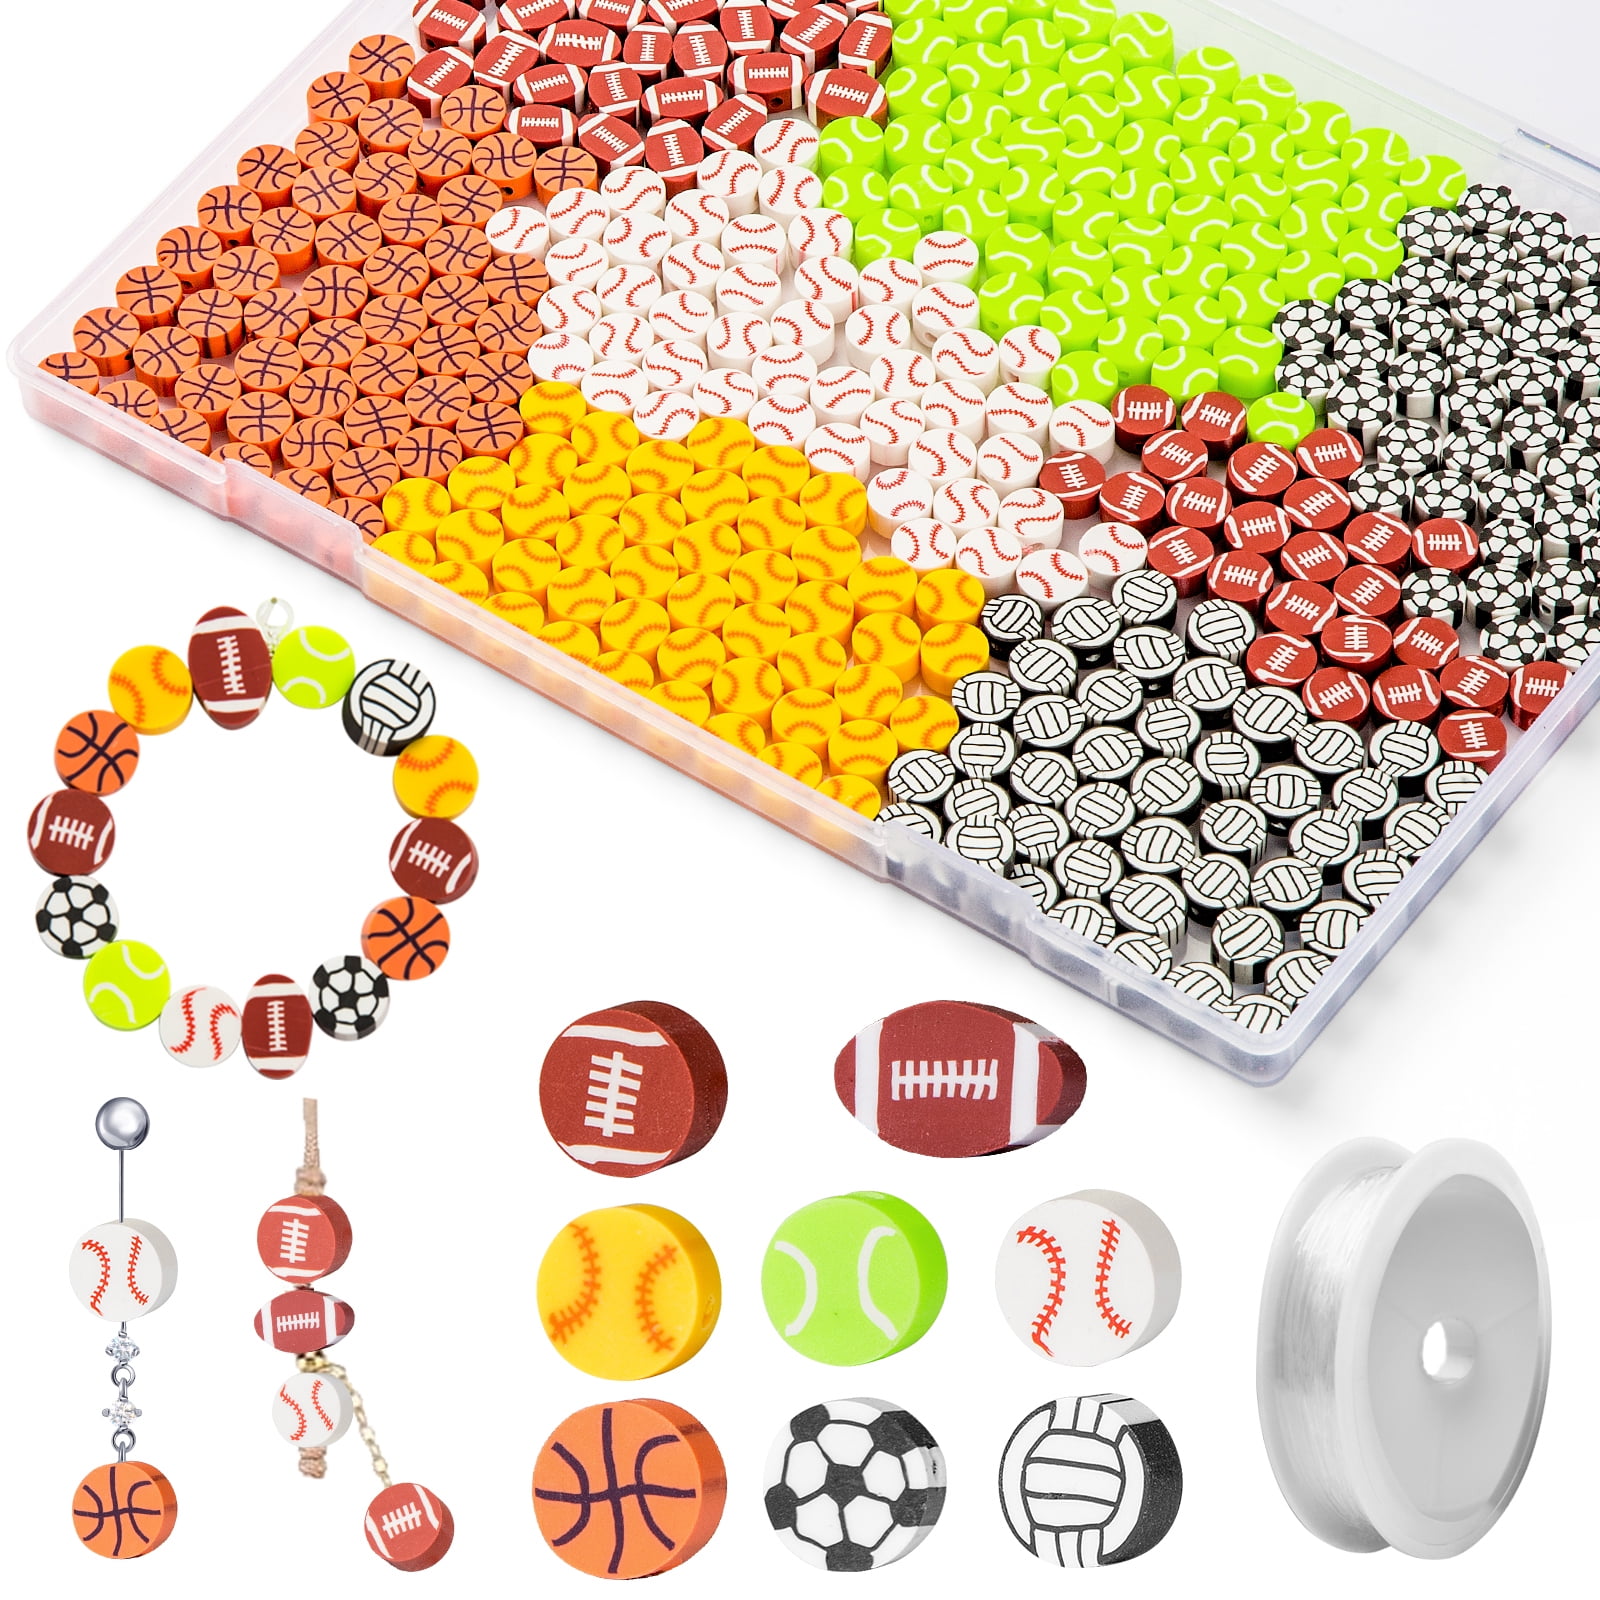 Willstar 3600Pcs 18 Colors 6mm Crafts DIY Clay Beads Set Round Flat Beads  Polymer Clay Beads Disc Loose Spacer for Jewelry Making Bracelets 